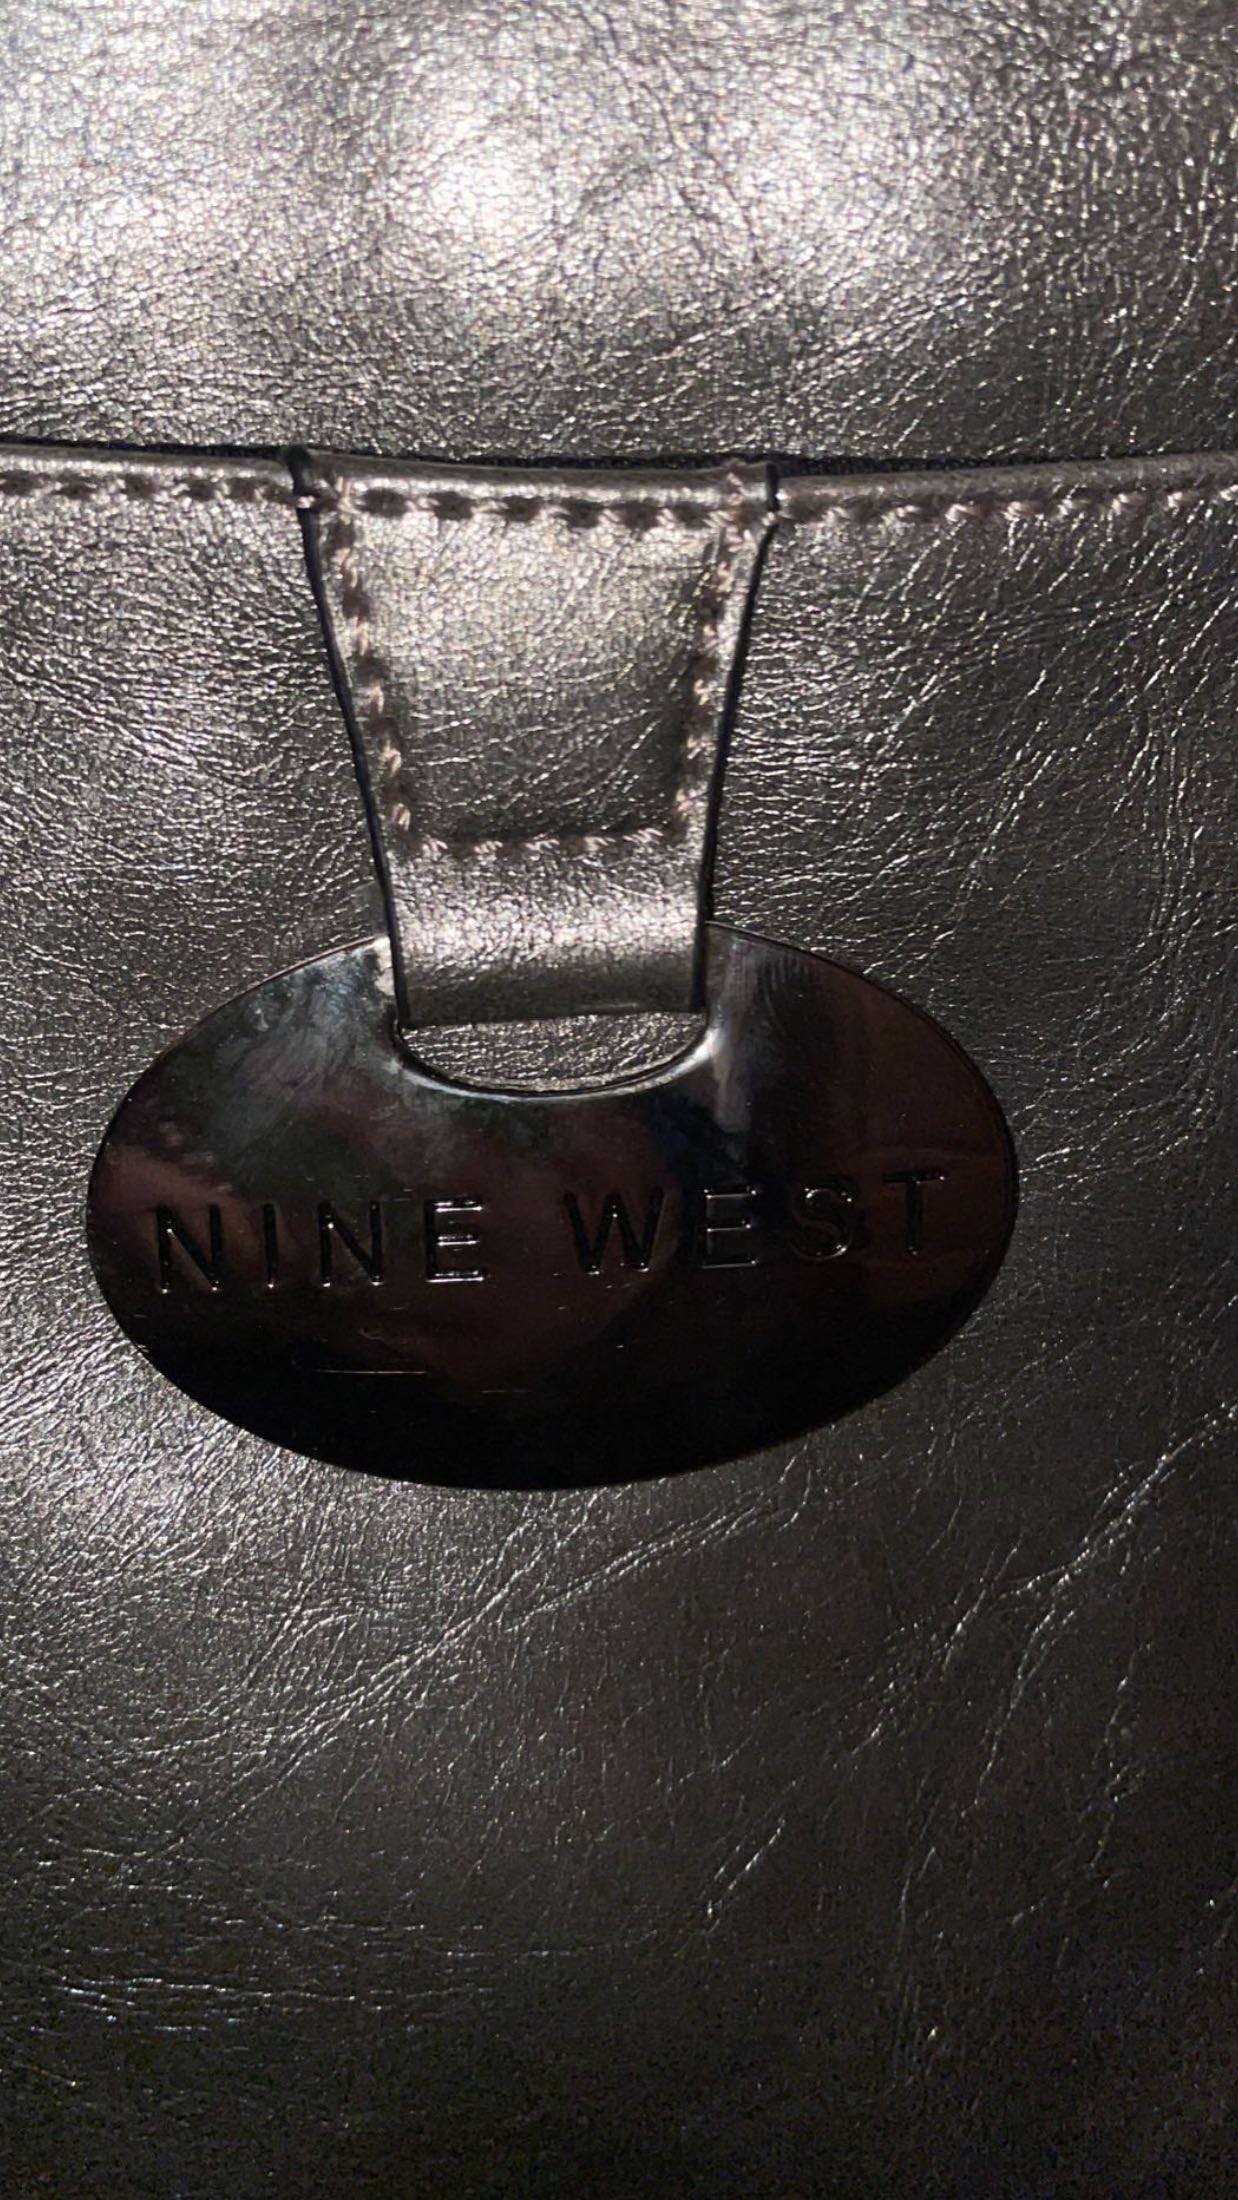 Nine West Reflective Silver Crossbody Bag - preowned